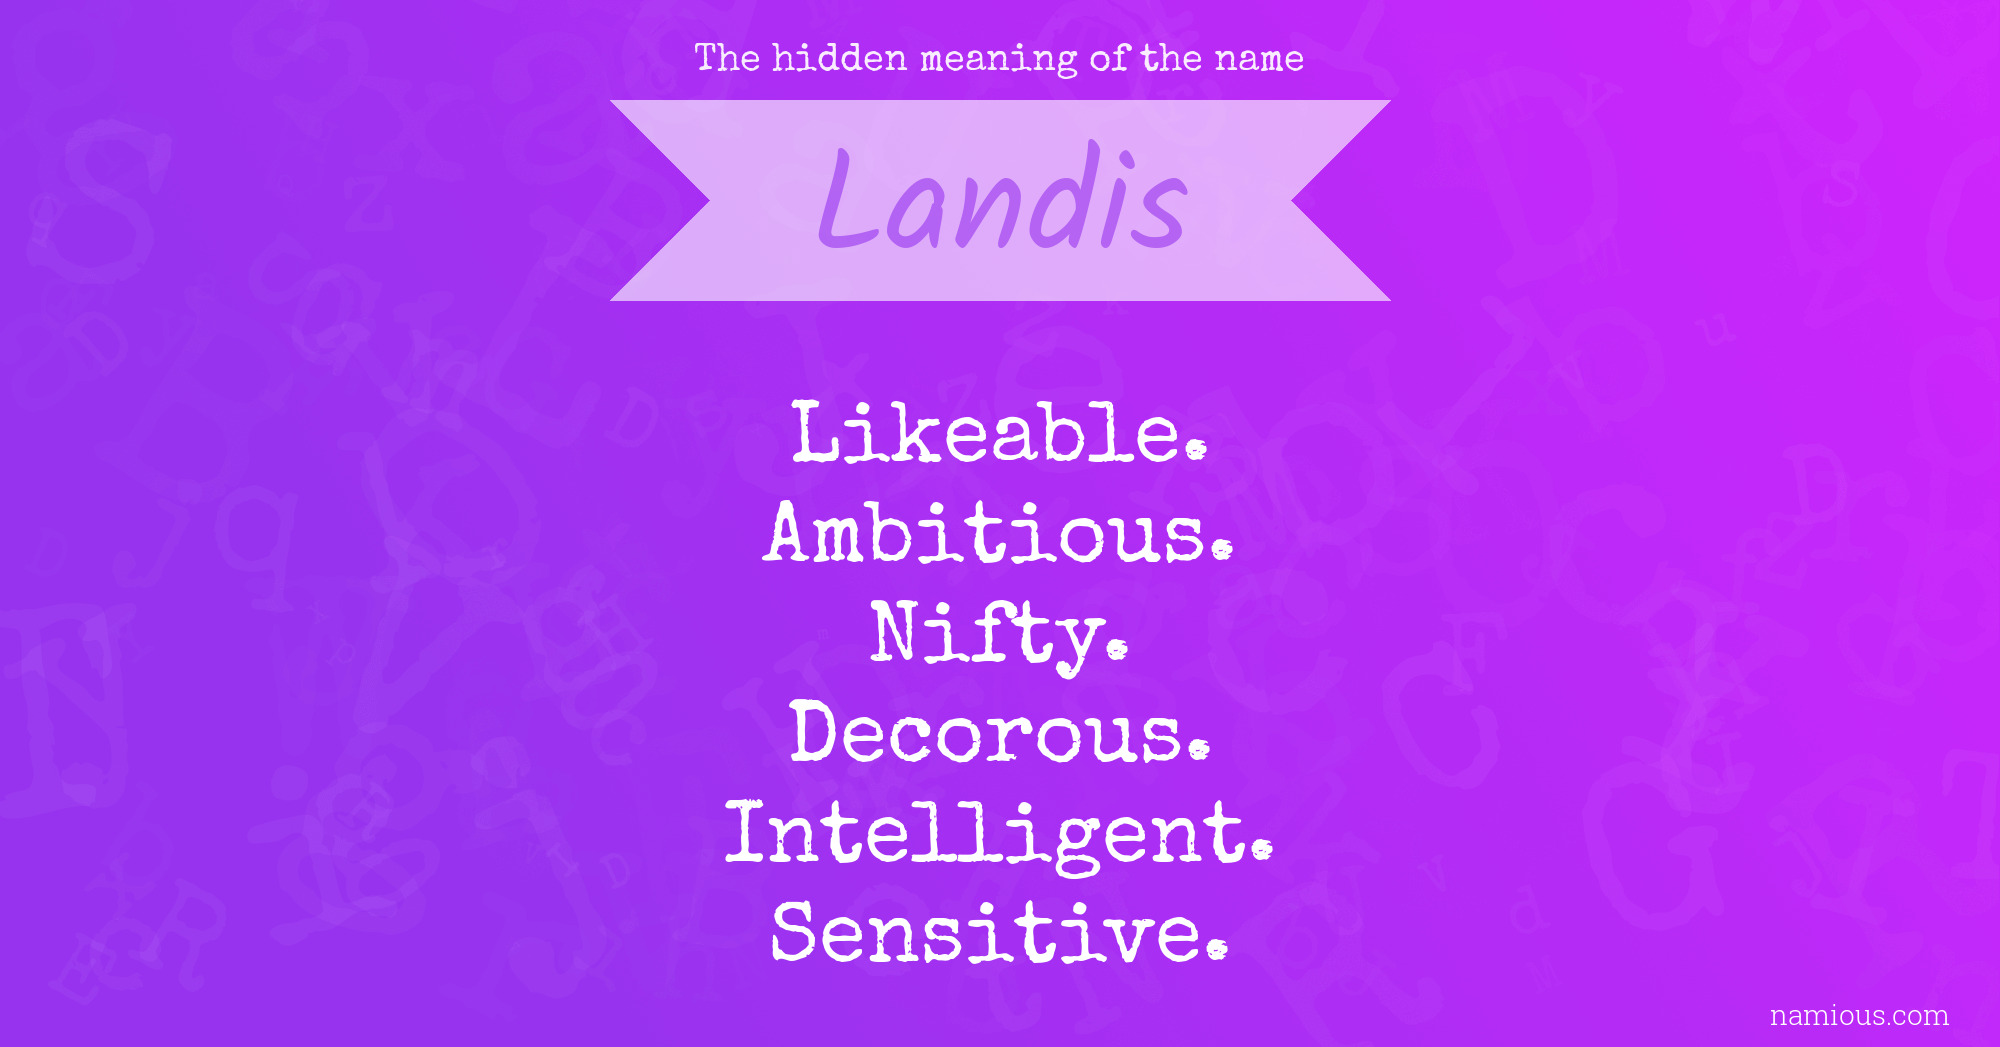 The hidden meaning of the name Landis